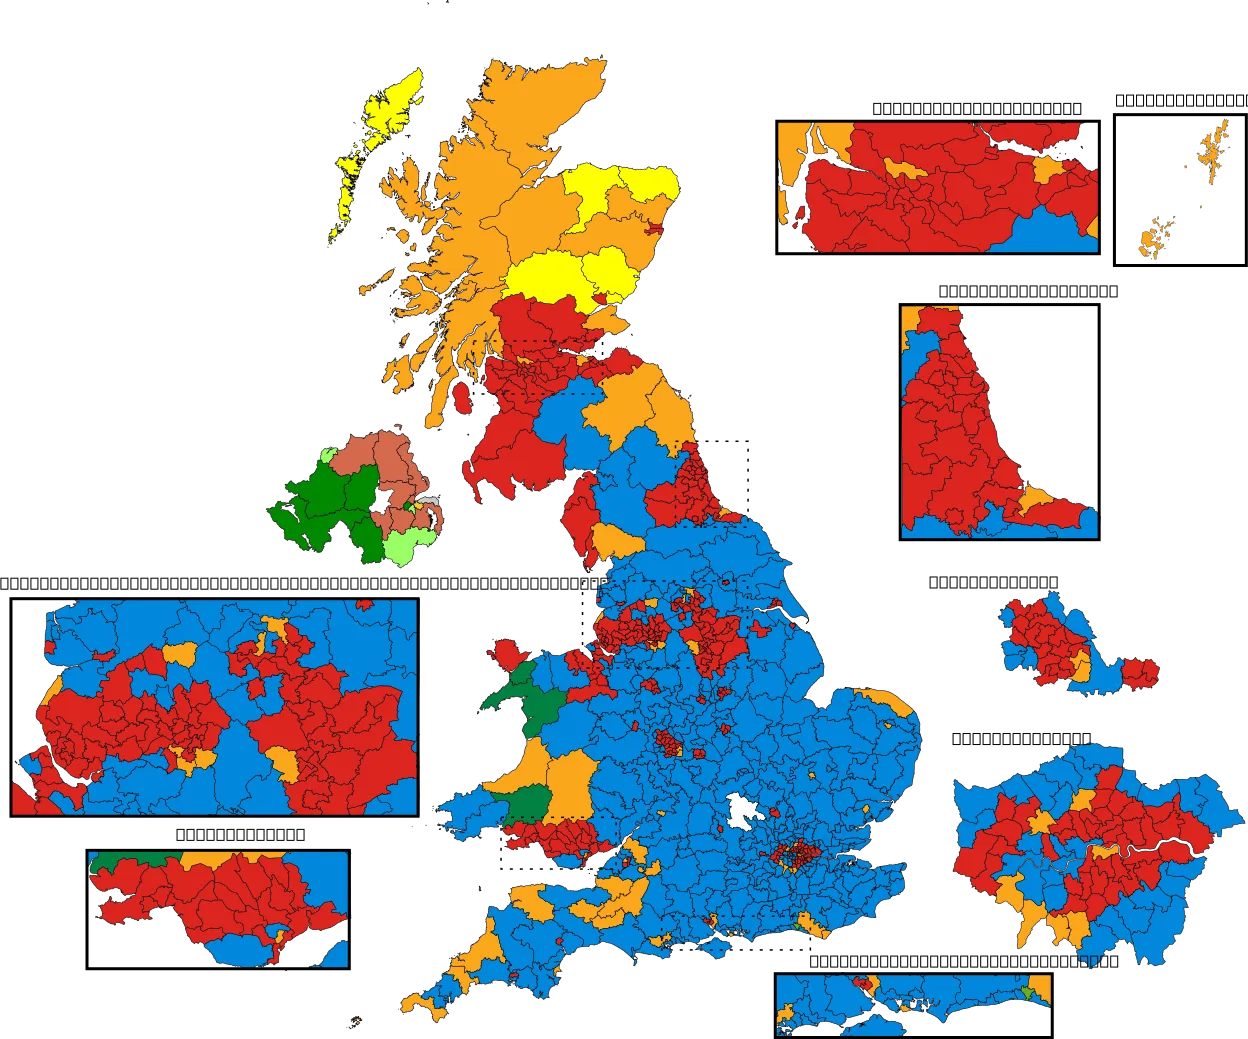 The UK 2010 General Election